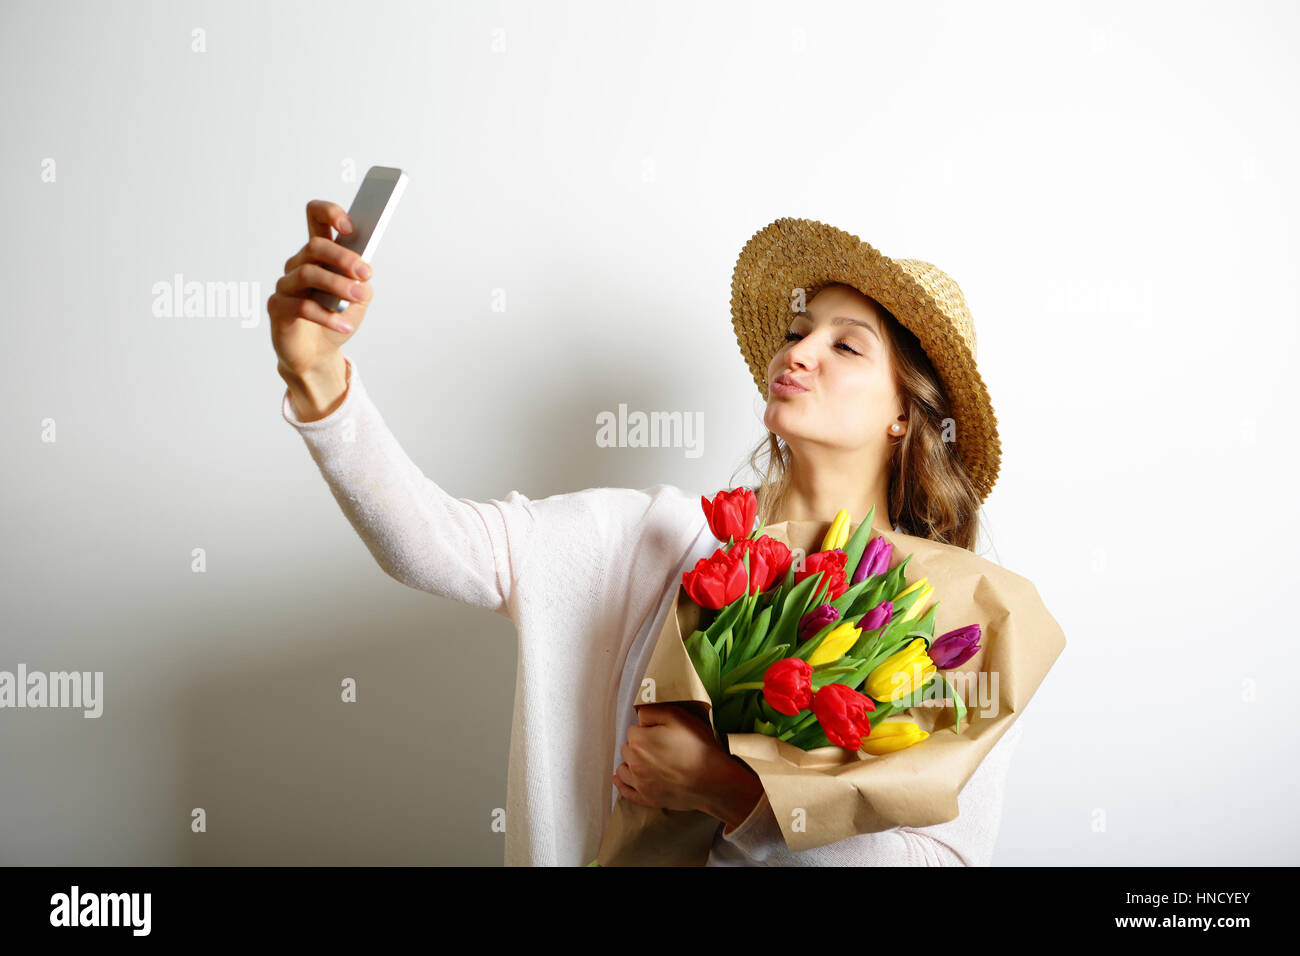 Young woman with kissing lips holding a bouquet of flowers in her hand, and makes selfie photo Stock Photo